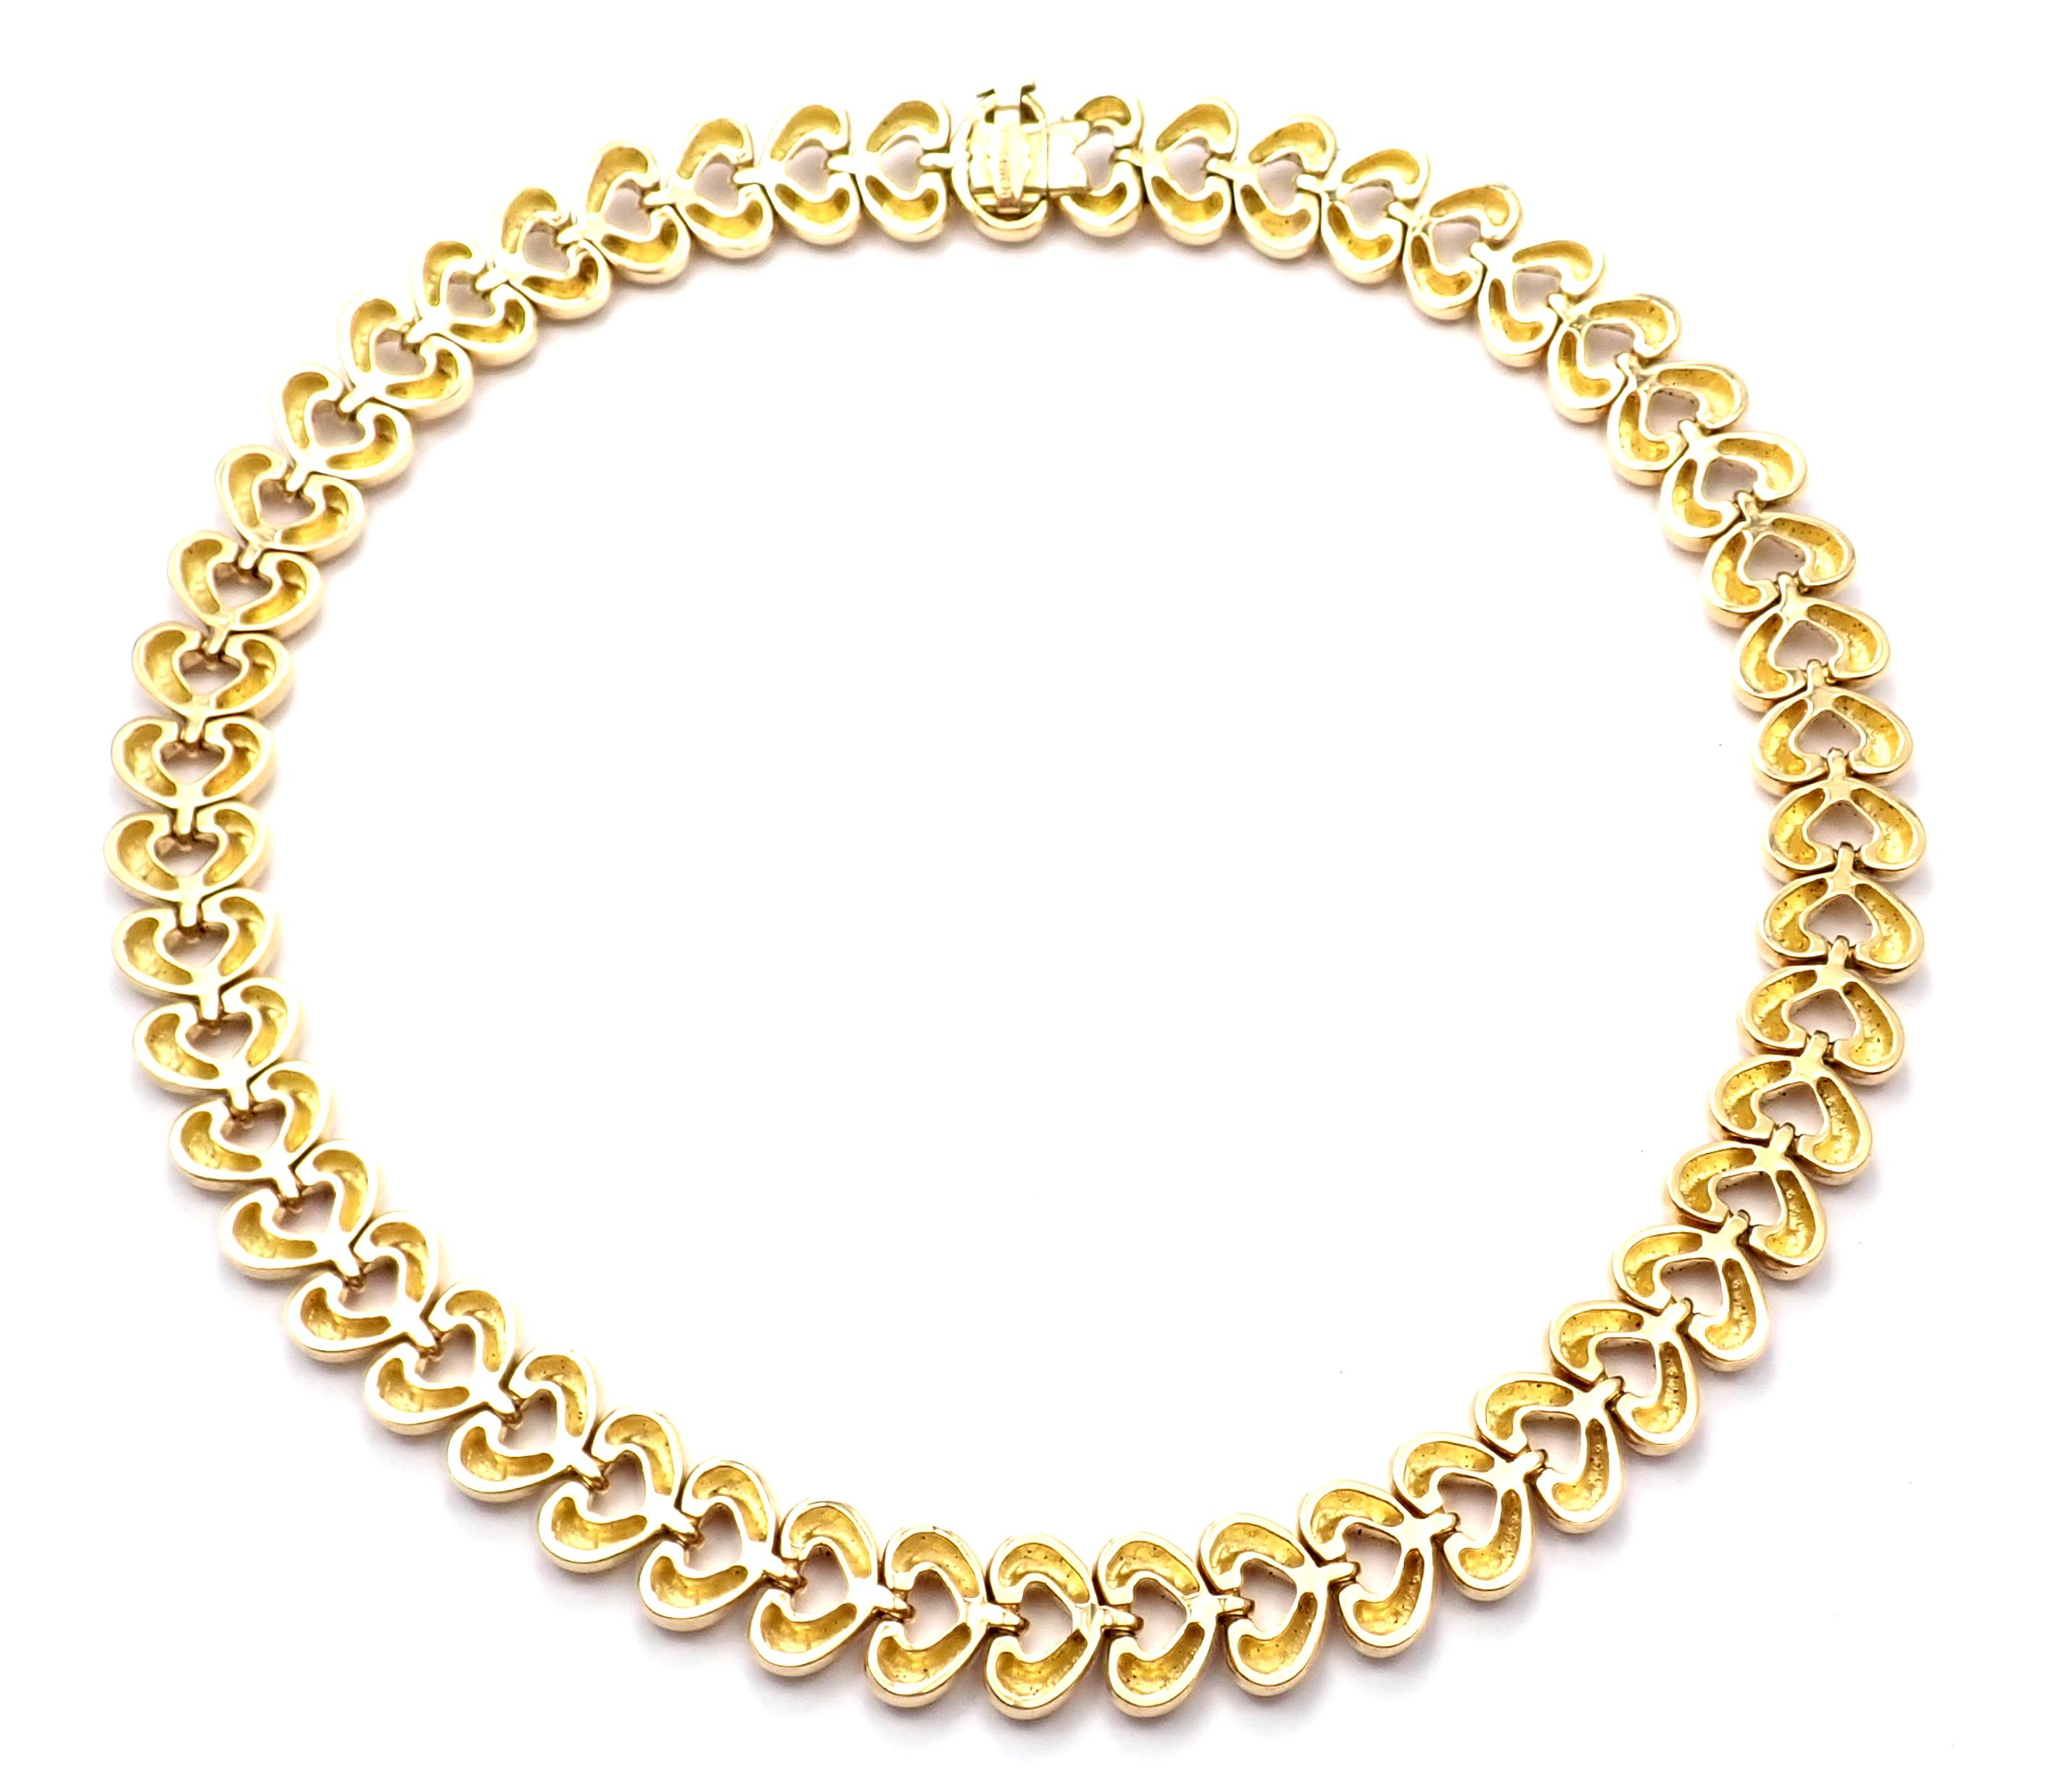 18k Yellow Gold Heart Link Choker Necklace by Van Cleef & Arpels. 
Details: 
Necklace Length: 15